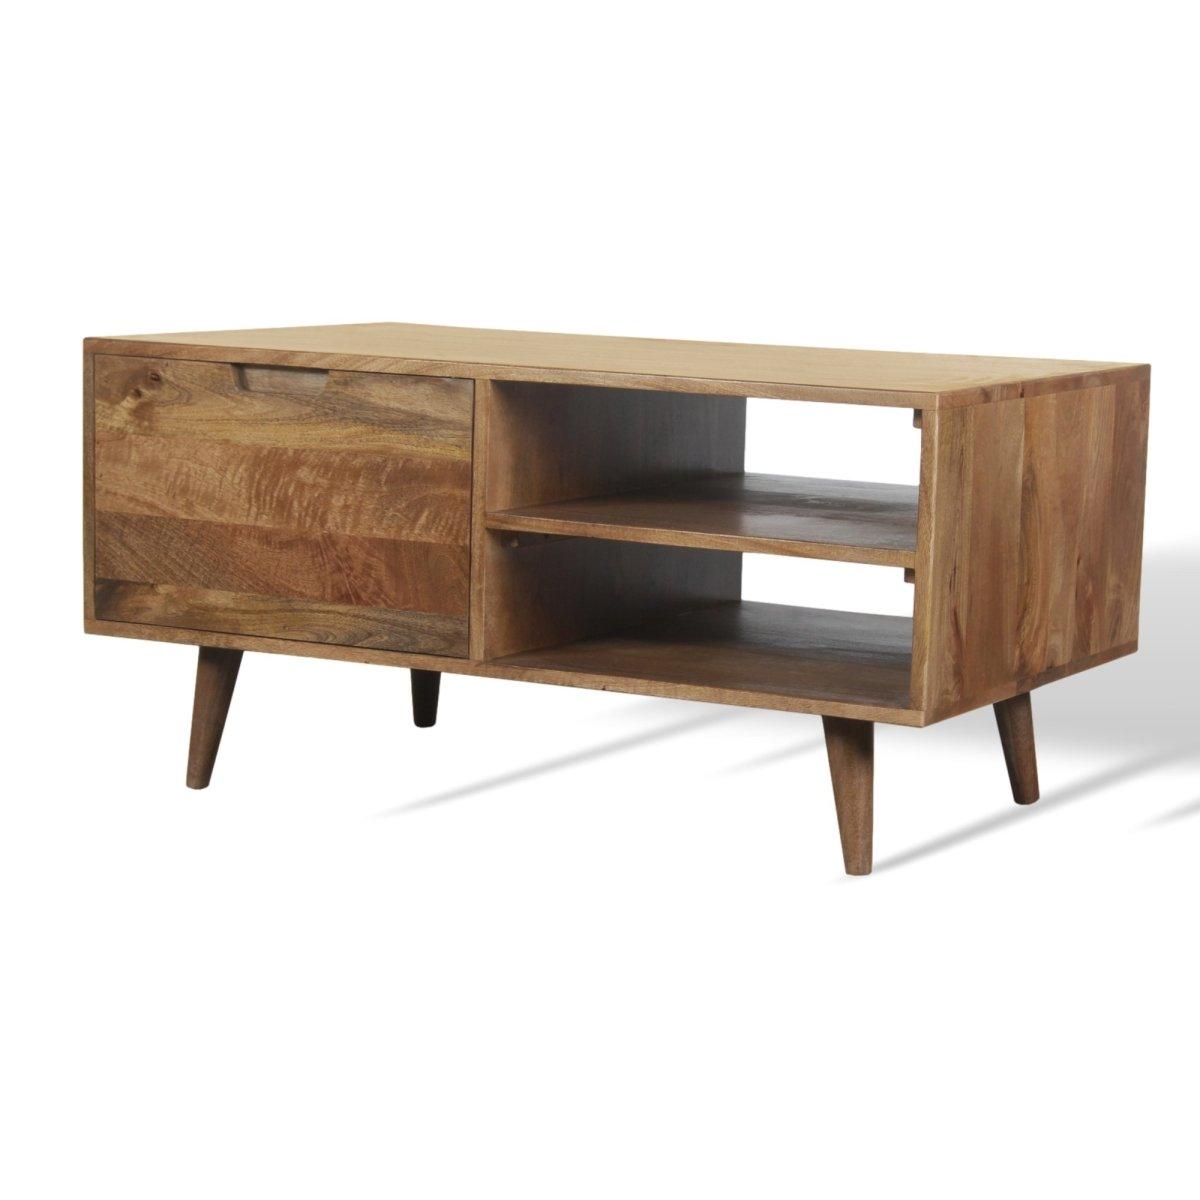 Mercury Mango Wood Coffee Table - Rustic Furniture Outlet